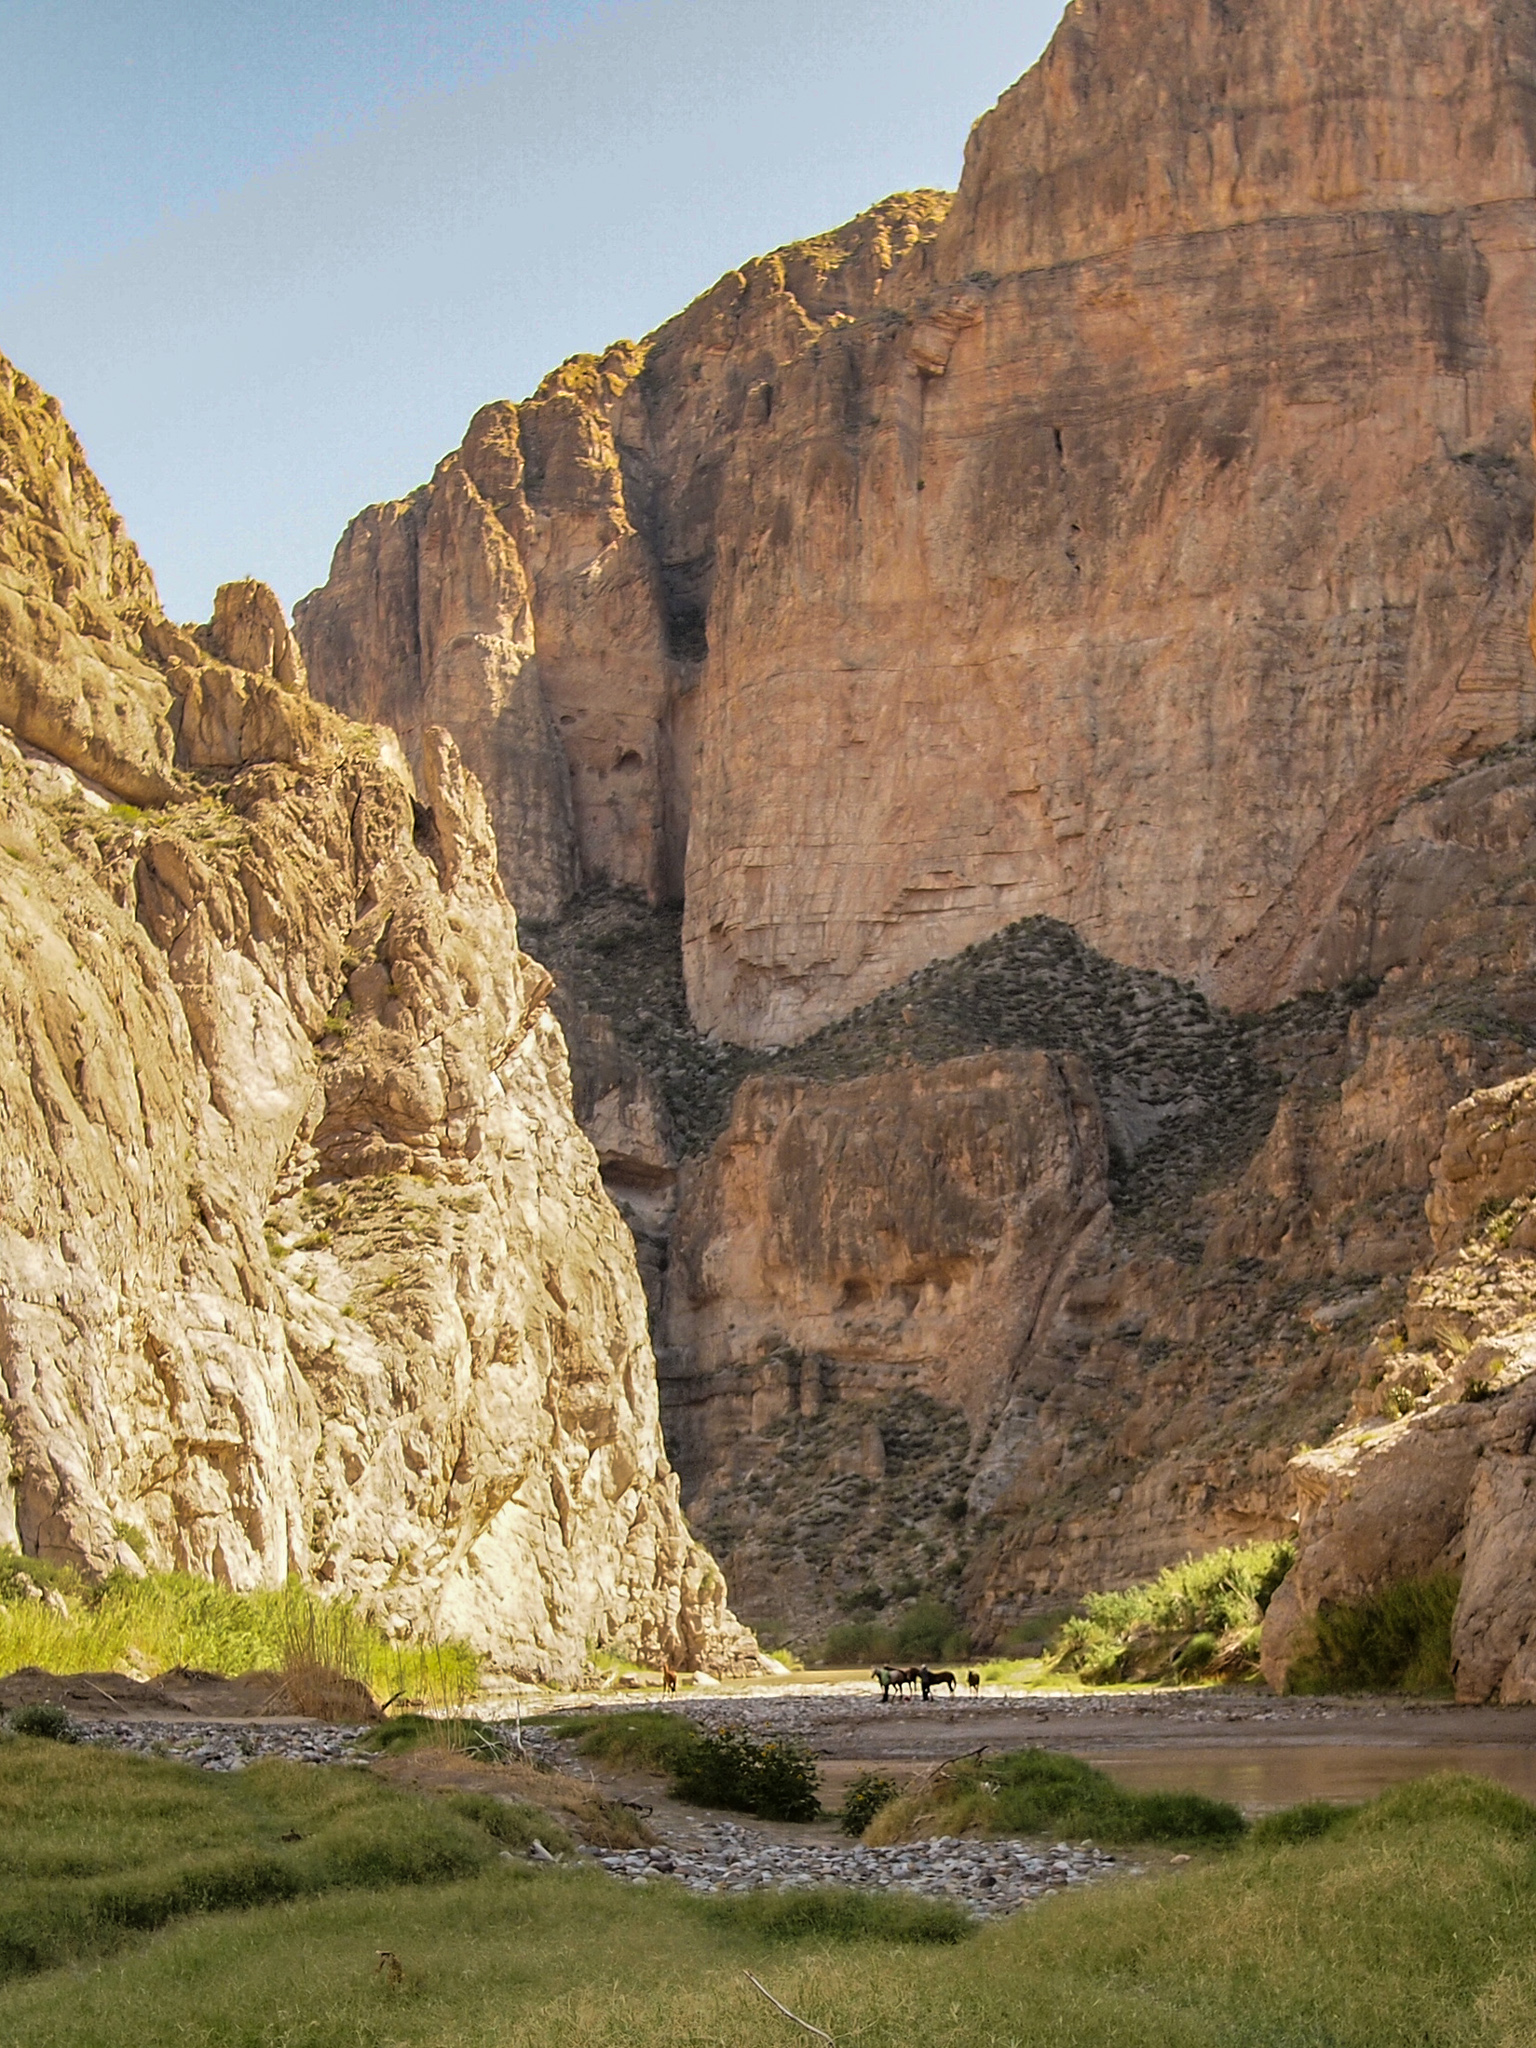 Horses on the riverbank show the scale of Boquillas Canyon in Big Bend National Park, Texas. Photo by Michael Janke via Flickr.